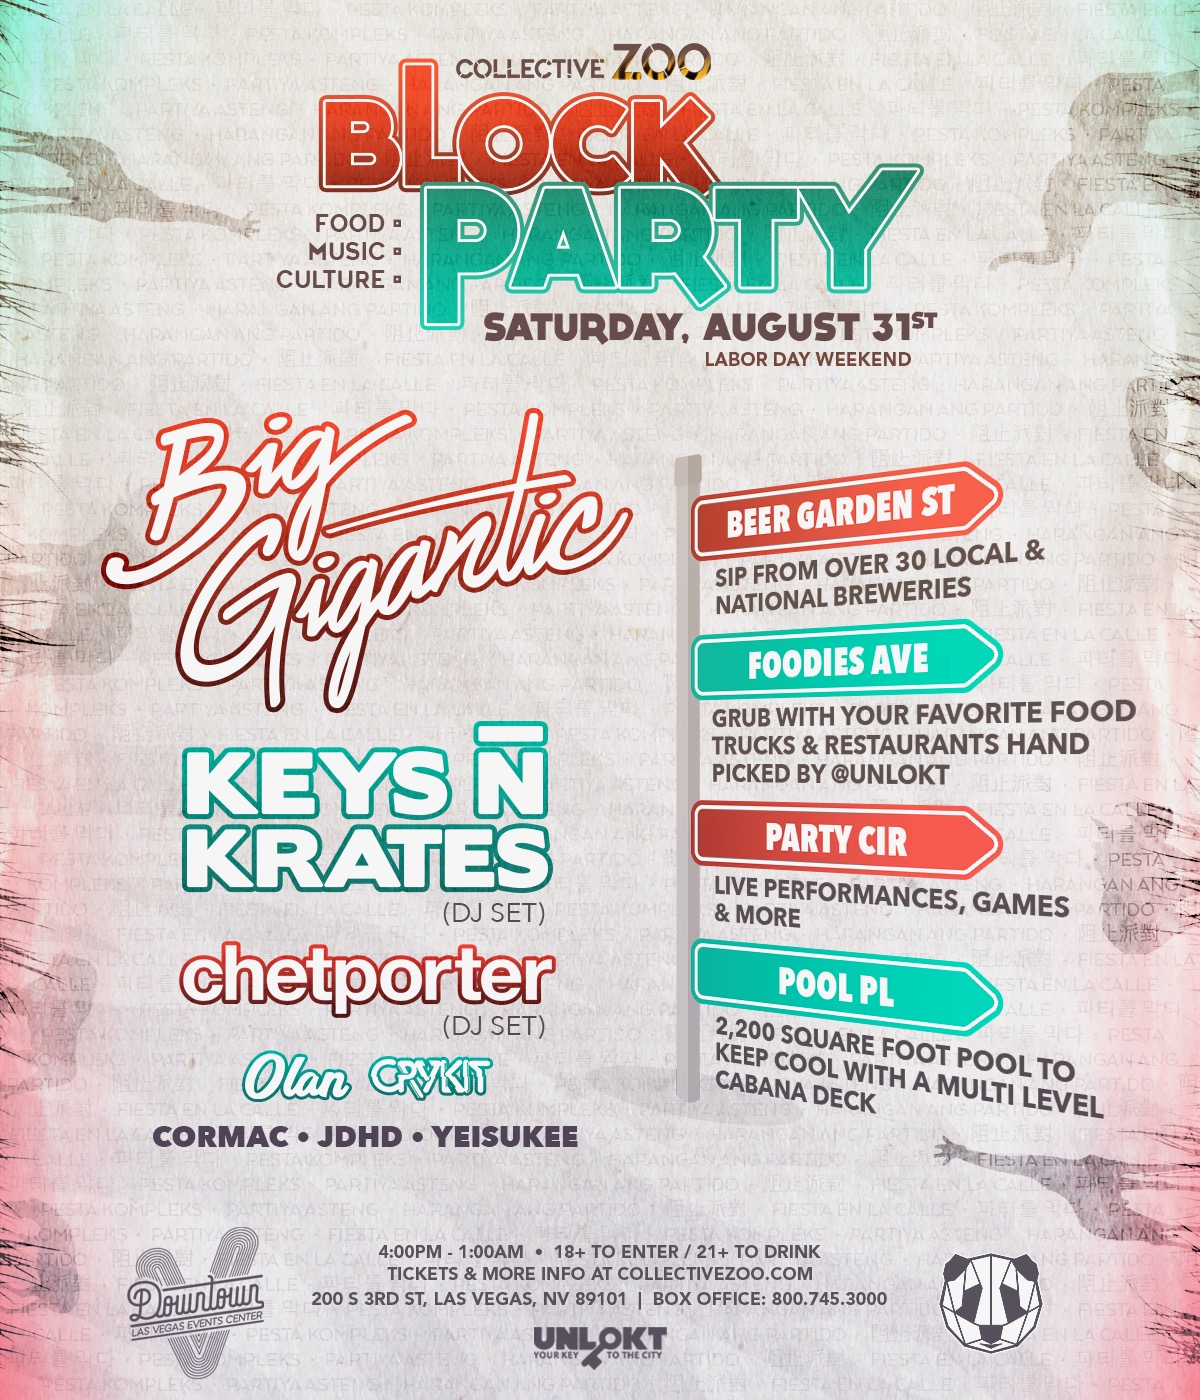 Collective Zoo Block Party 2019 Lineup